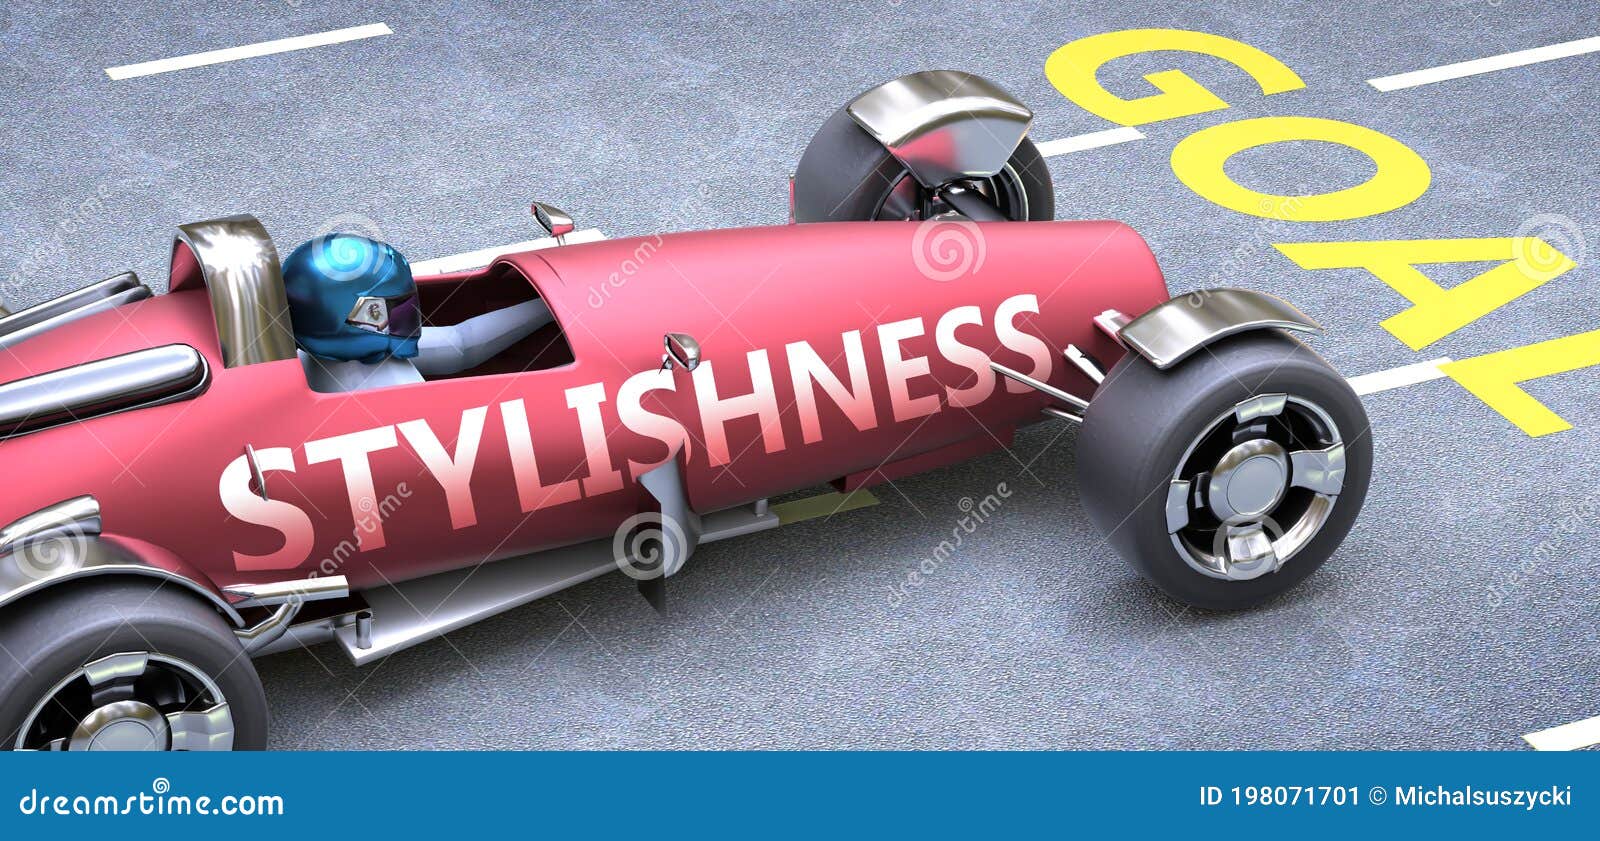 stylishness helps reaching goals, pictured as a race car with a phrase stylishness on a track as a metaphor of stylishness playing